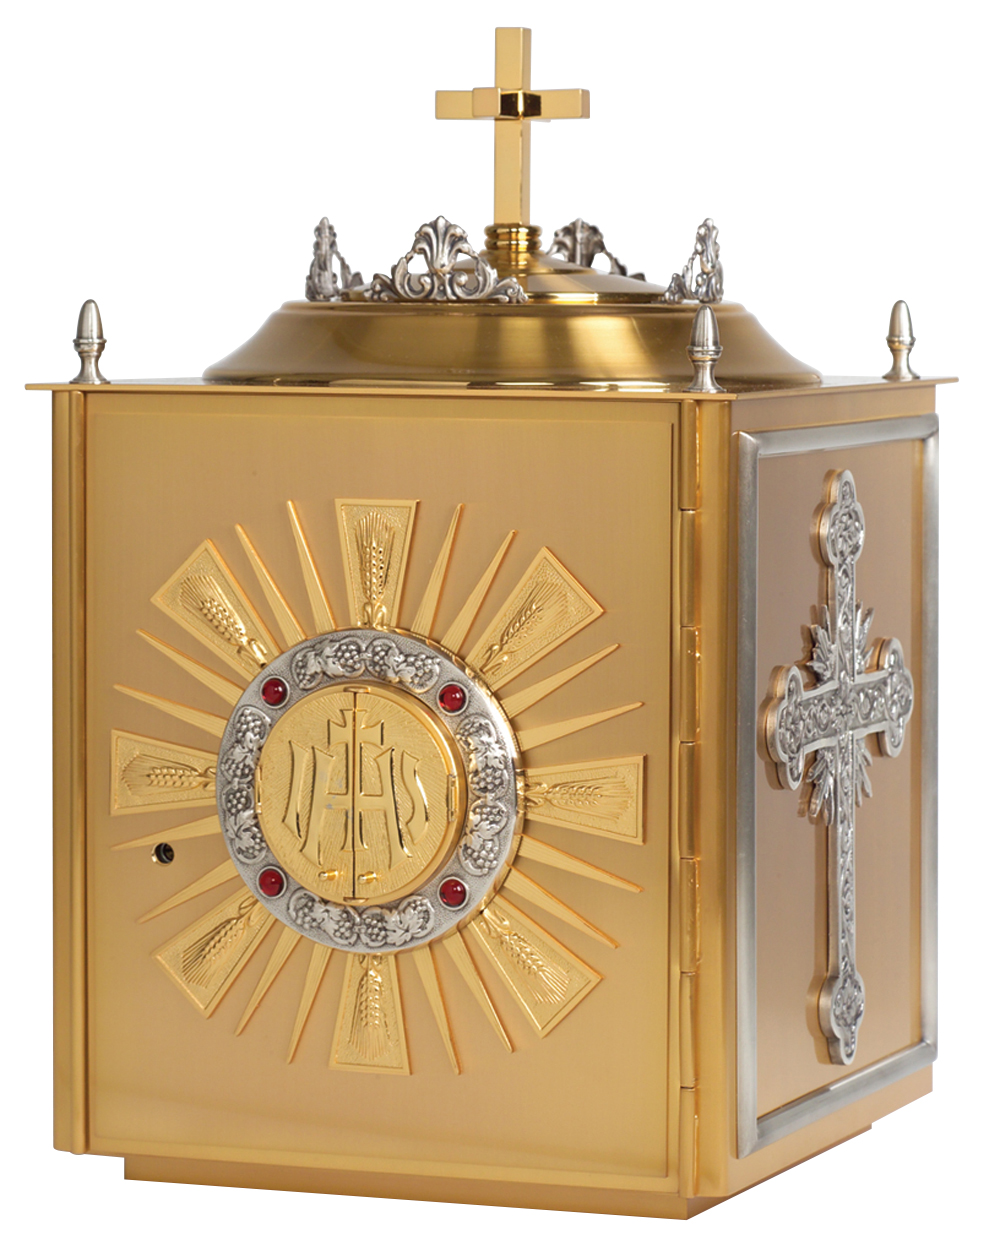 Exposition Tabernacle Gold Plate Accented Sides